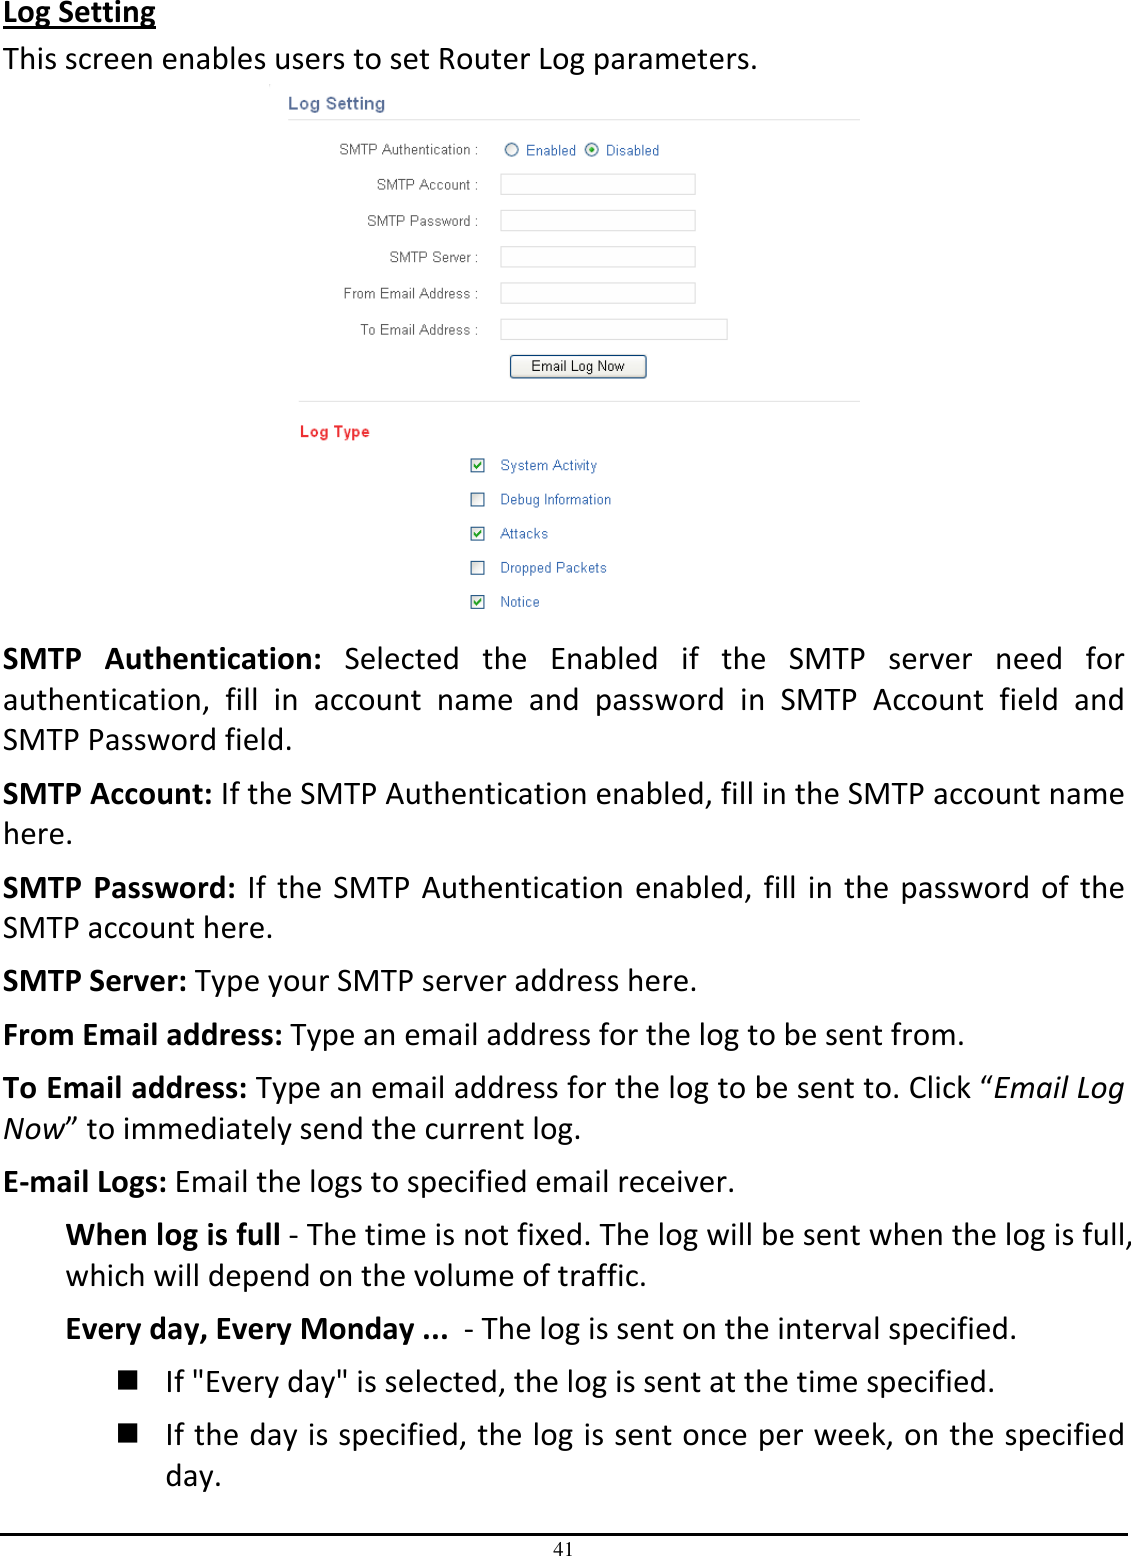 41 Log Setting This screen enables users to set Router Log parameters.  SMTP  Authentication:  Selected  the  Enabled  if  the  SMTP  server  need  for authentication,  fill  in  account  name  and  password  in  SMTP  Account  field  and SMTP Password field. SMTP Account: If the SMTP Authentication enabled, fill in the SMTP account name here. SMTP  Password:  If the  SMTP Authentication  enabled, fill in the  password of  the SMTP account here. SMTP Server: Type your SMTP server address here. From Email address: Type an email address for the log to be sent from. To Email address: Type an email address for the log to be sent to. Click “Email Log Now” to immediately send the current log. E-mail Logs: Email the logs to specified email receiver. When log is full - The time is not fixed. The log will be sent when the log is full, which will depend on the volume of traffic. Every day, Every Monday ...  - The log is sent on the interval specified.   If &quot;Every day&quot; is selected, the log is sent at the time specified.   If the day is specified, the log is sent once per week, on the specified day.  